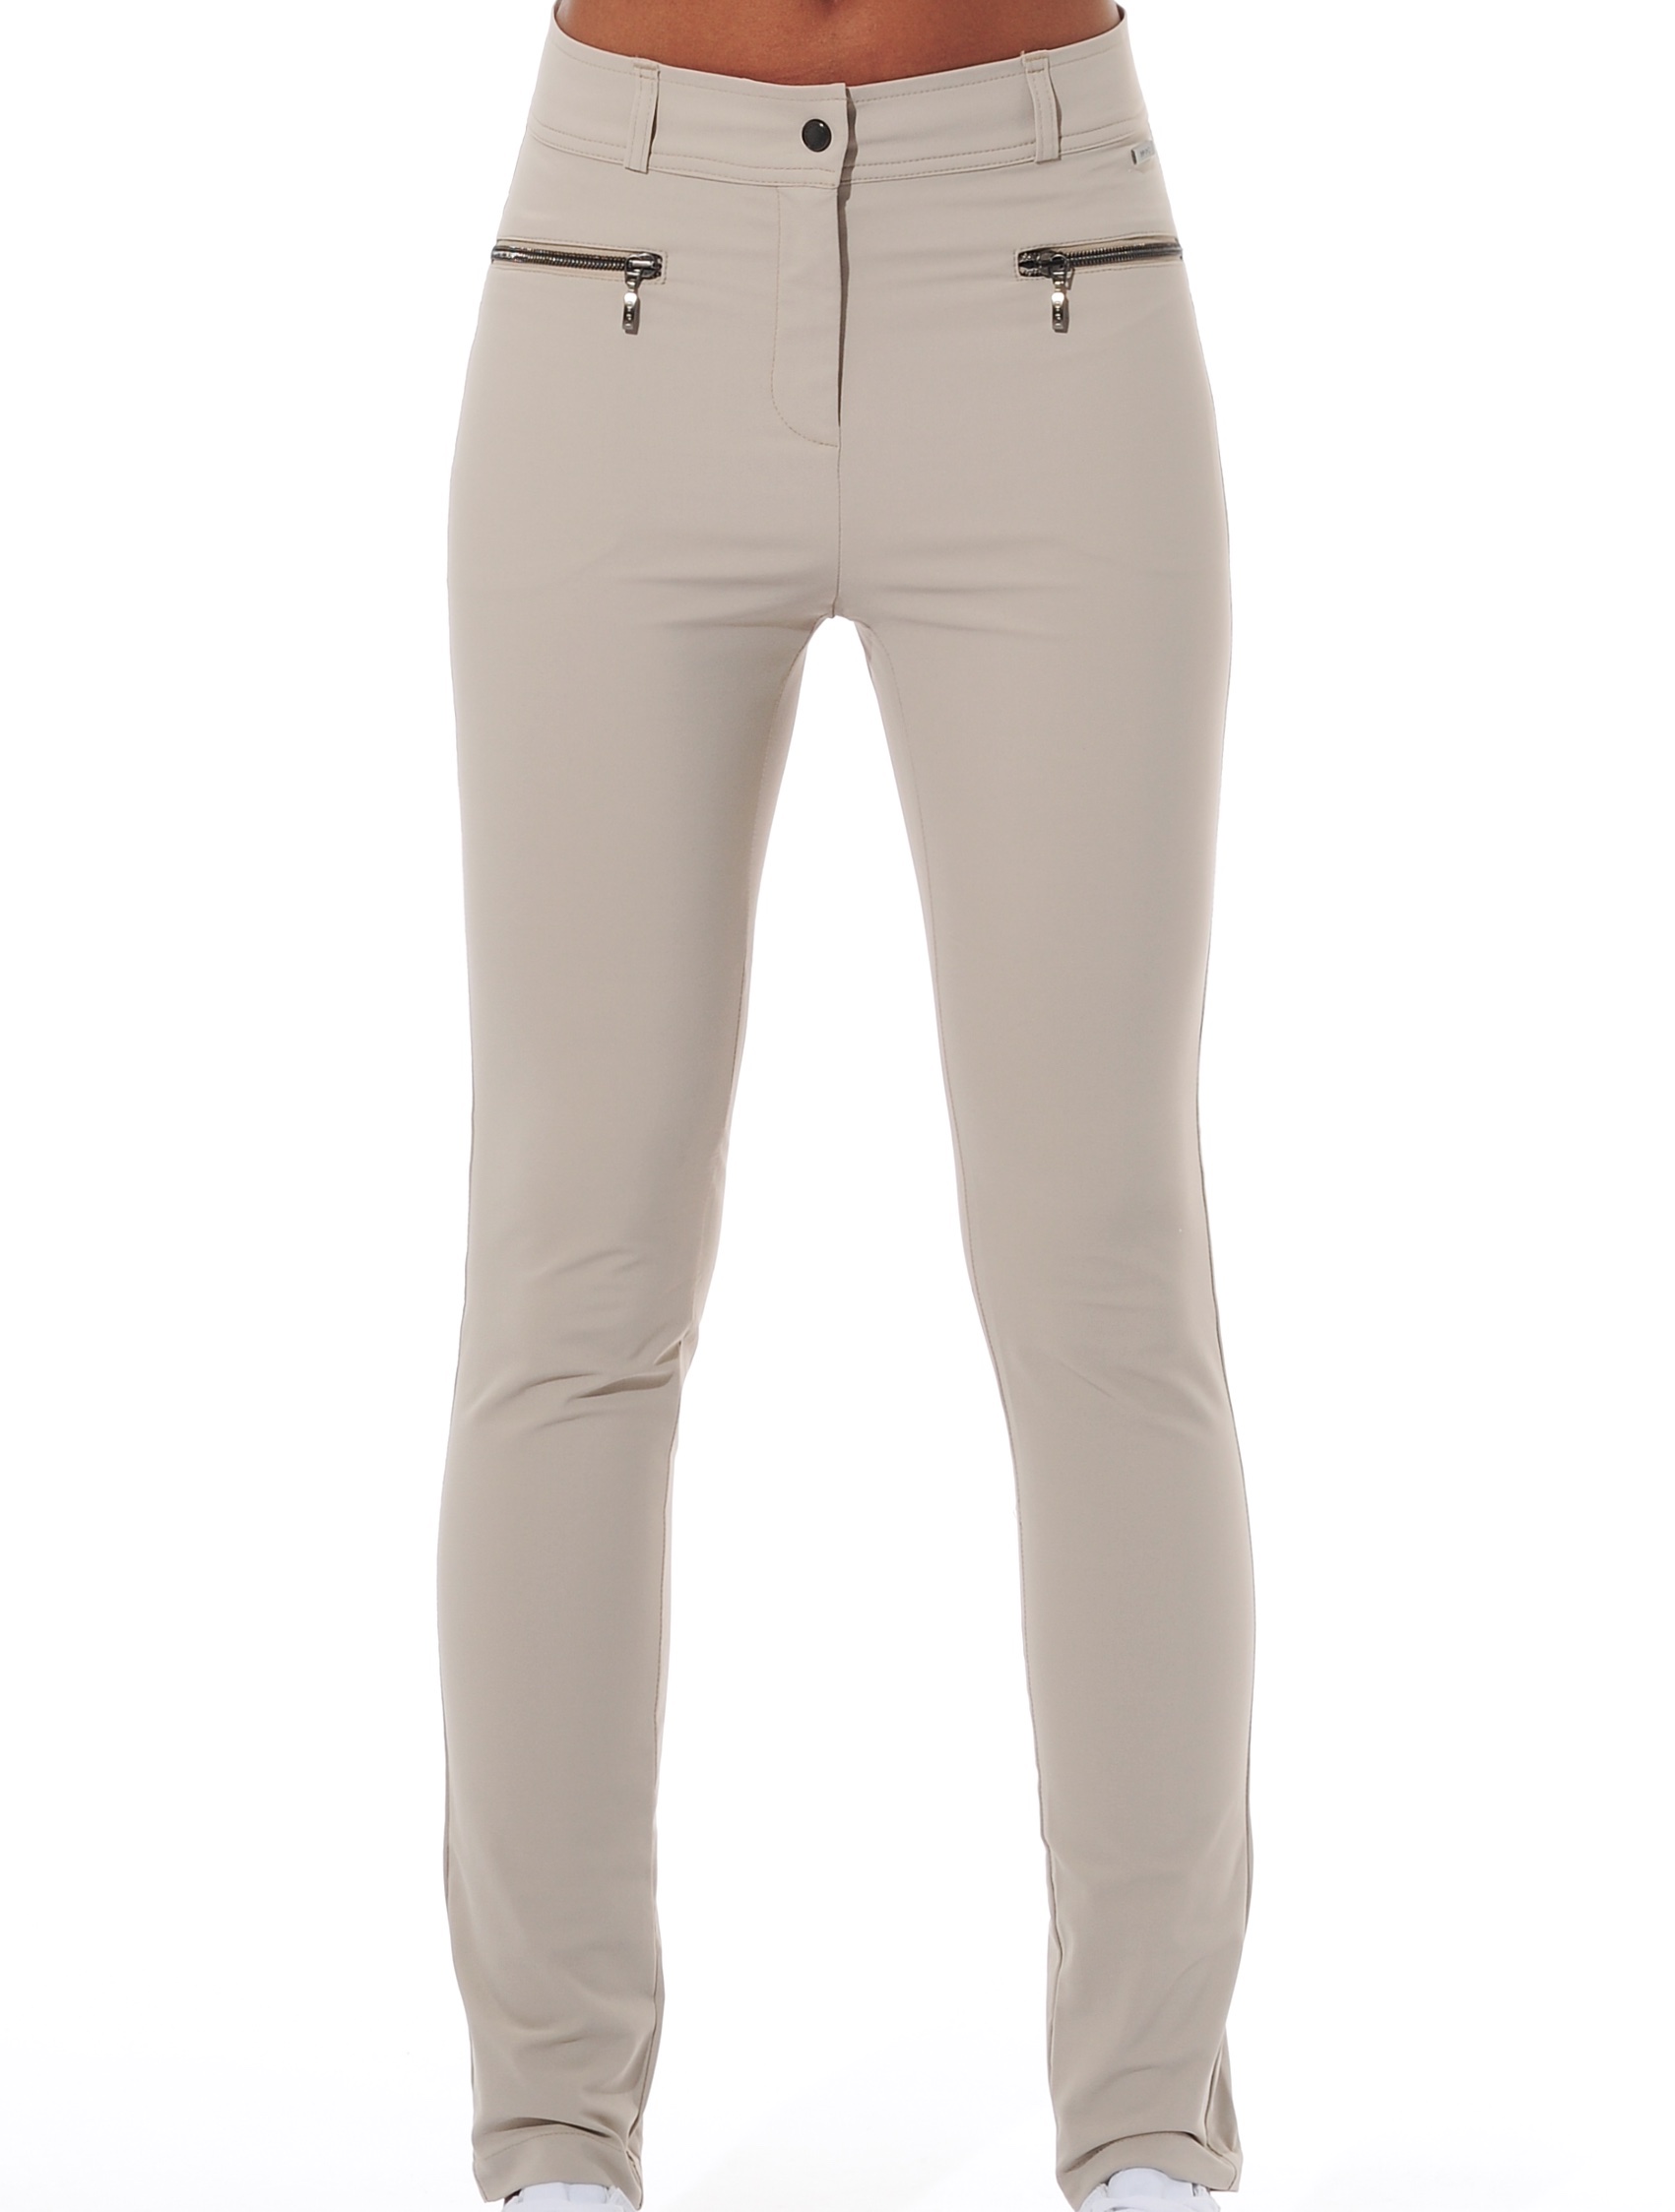 4way stretch jeggings light taupe 